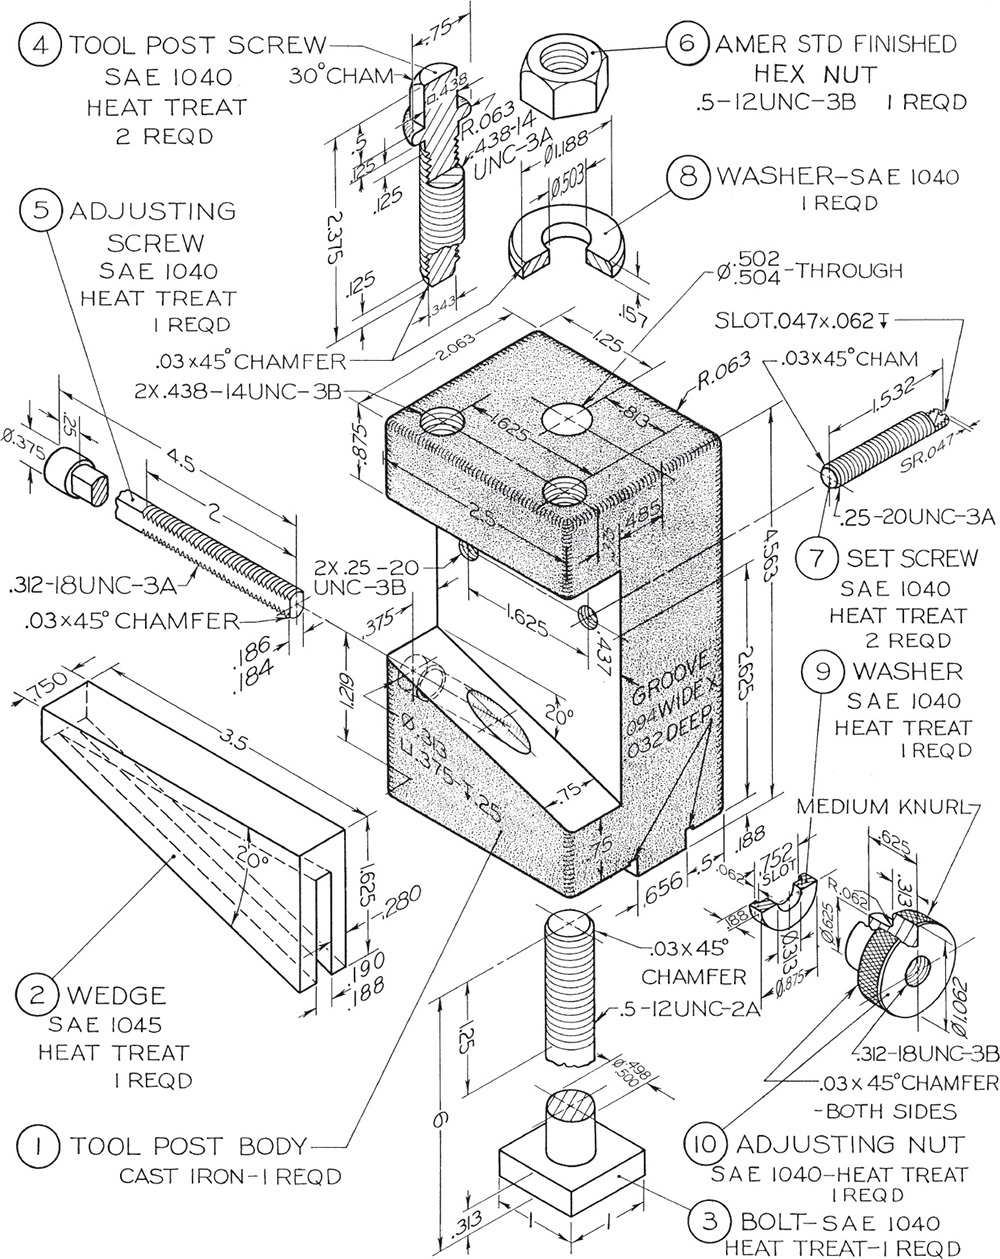 Figure shows the drawing for tool post.